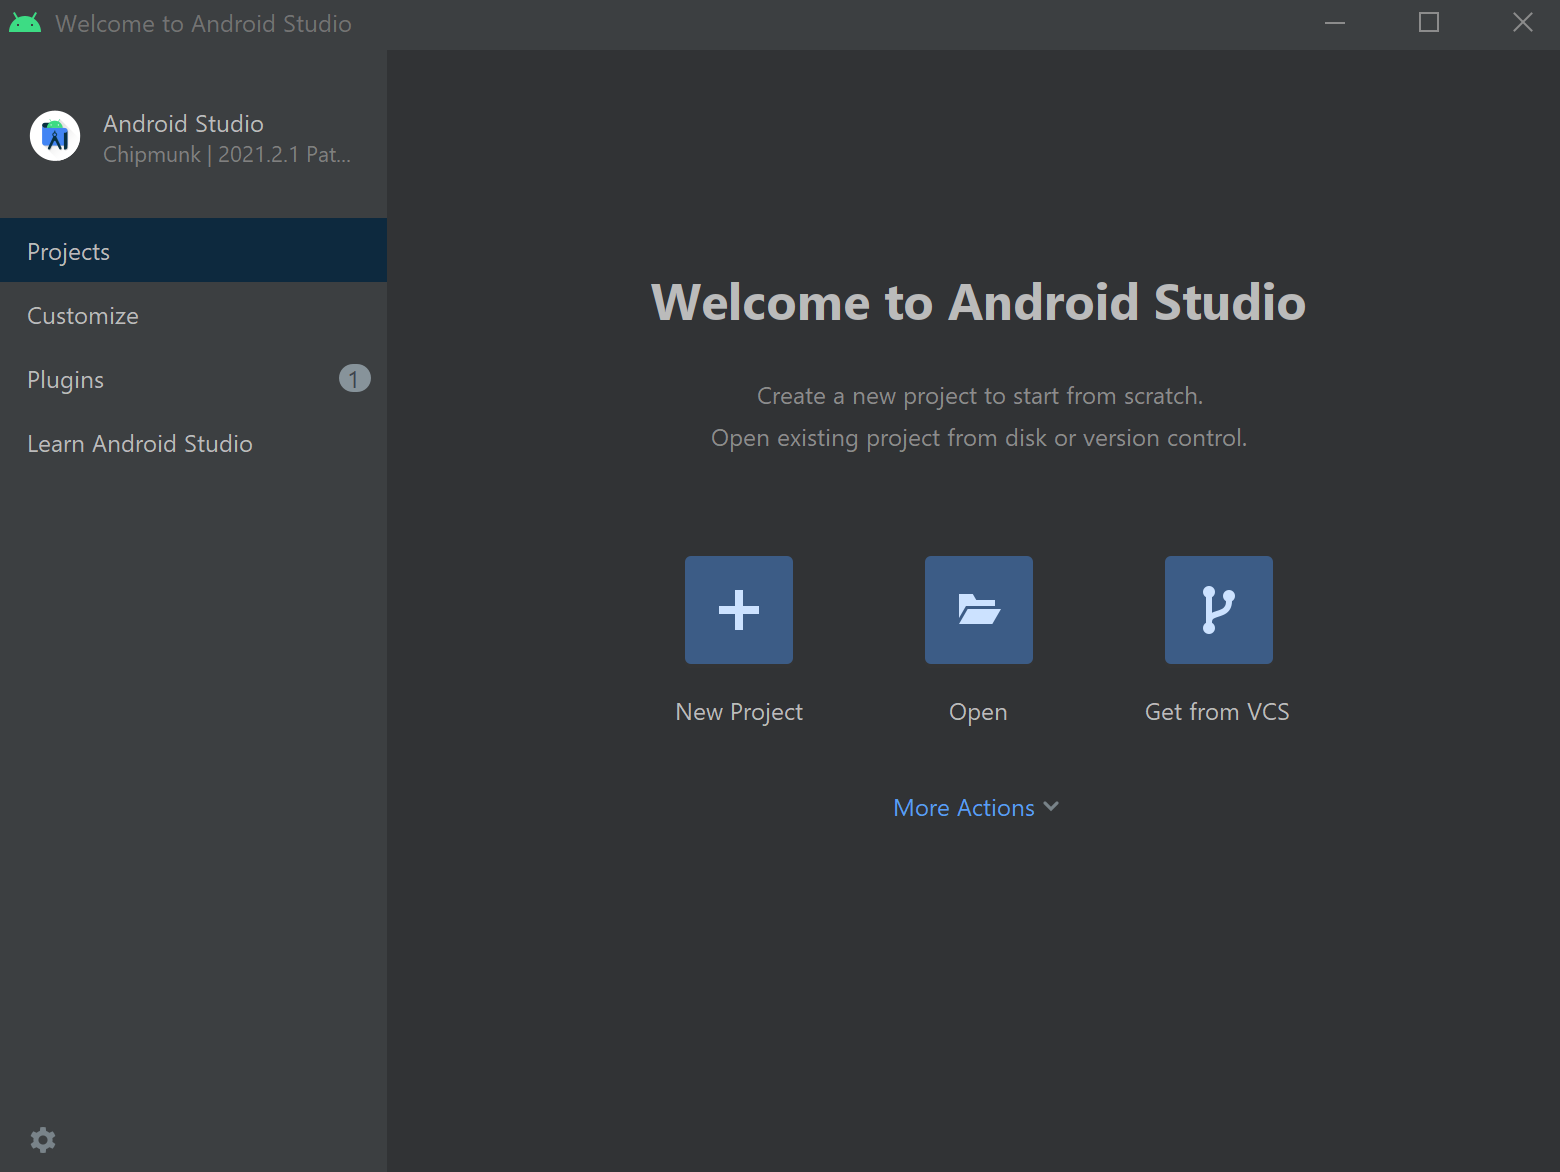 Screenshot showing options to open or create new projects.